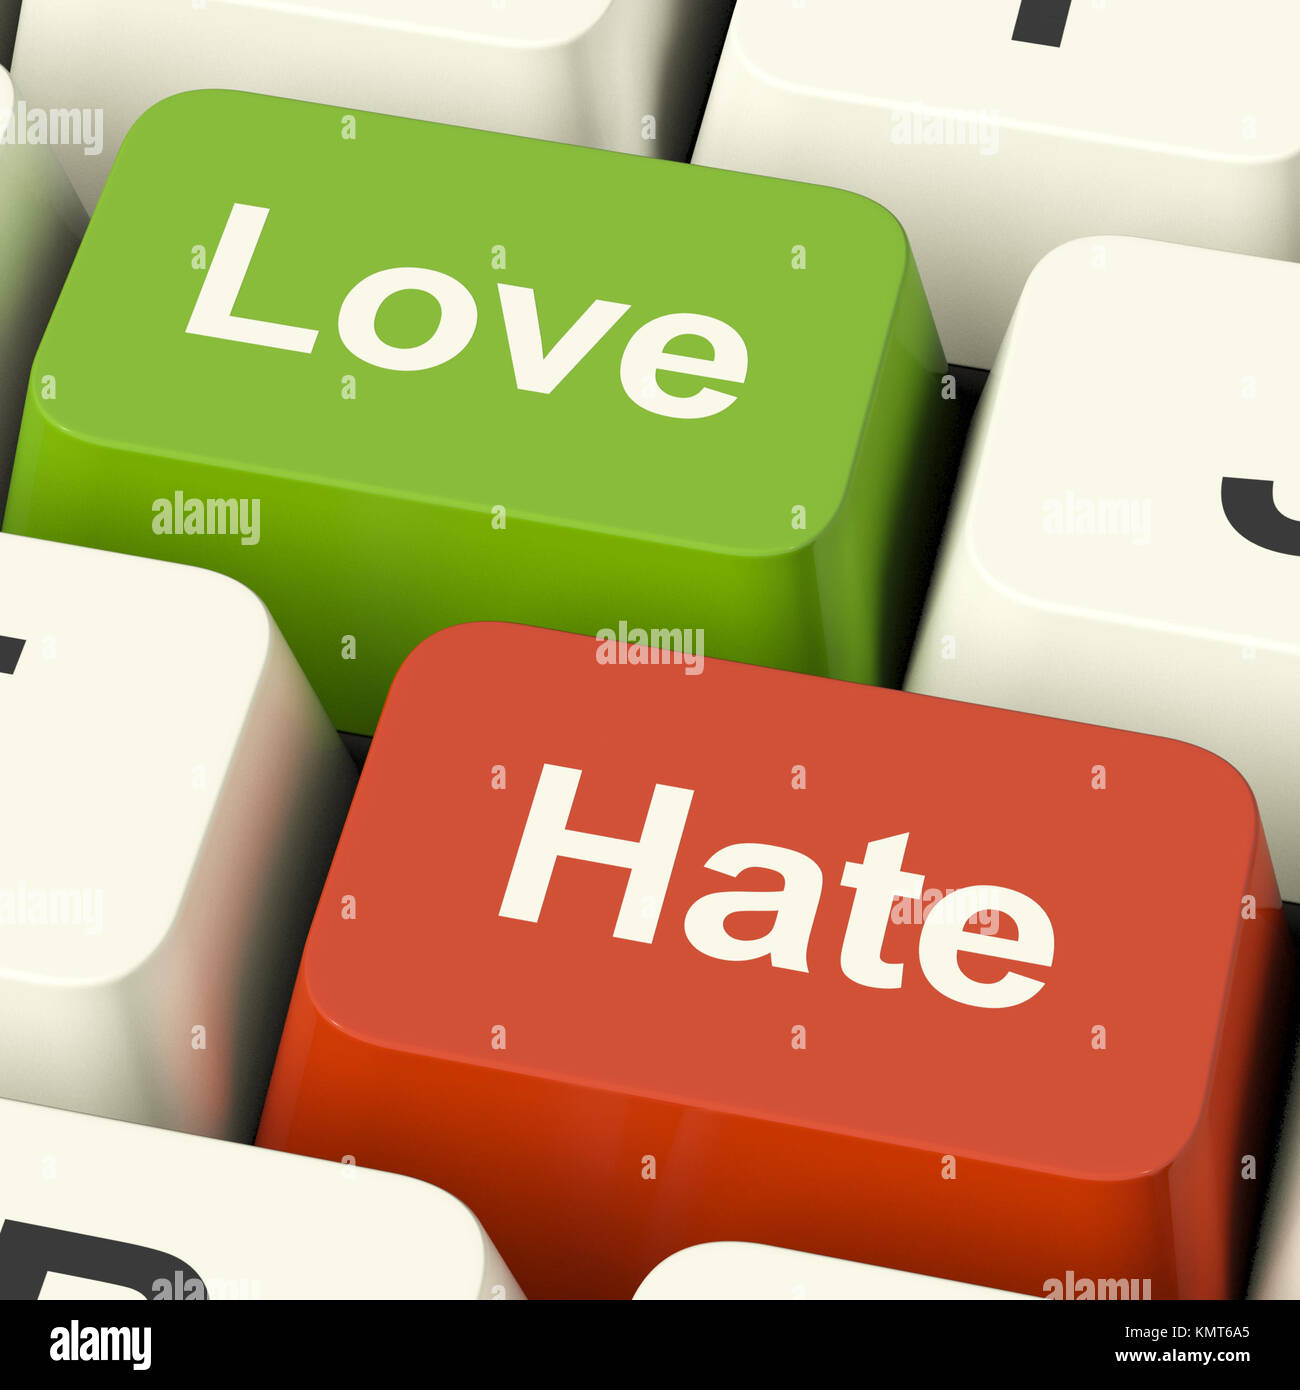 Love Hate Computer Keys Shows Emotion Anger And Conflict Stock Photo